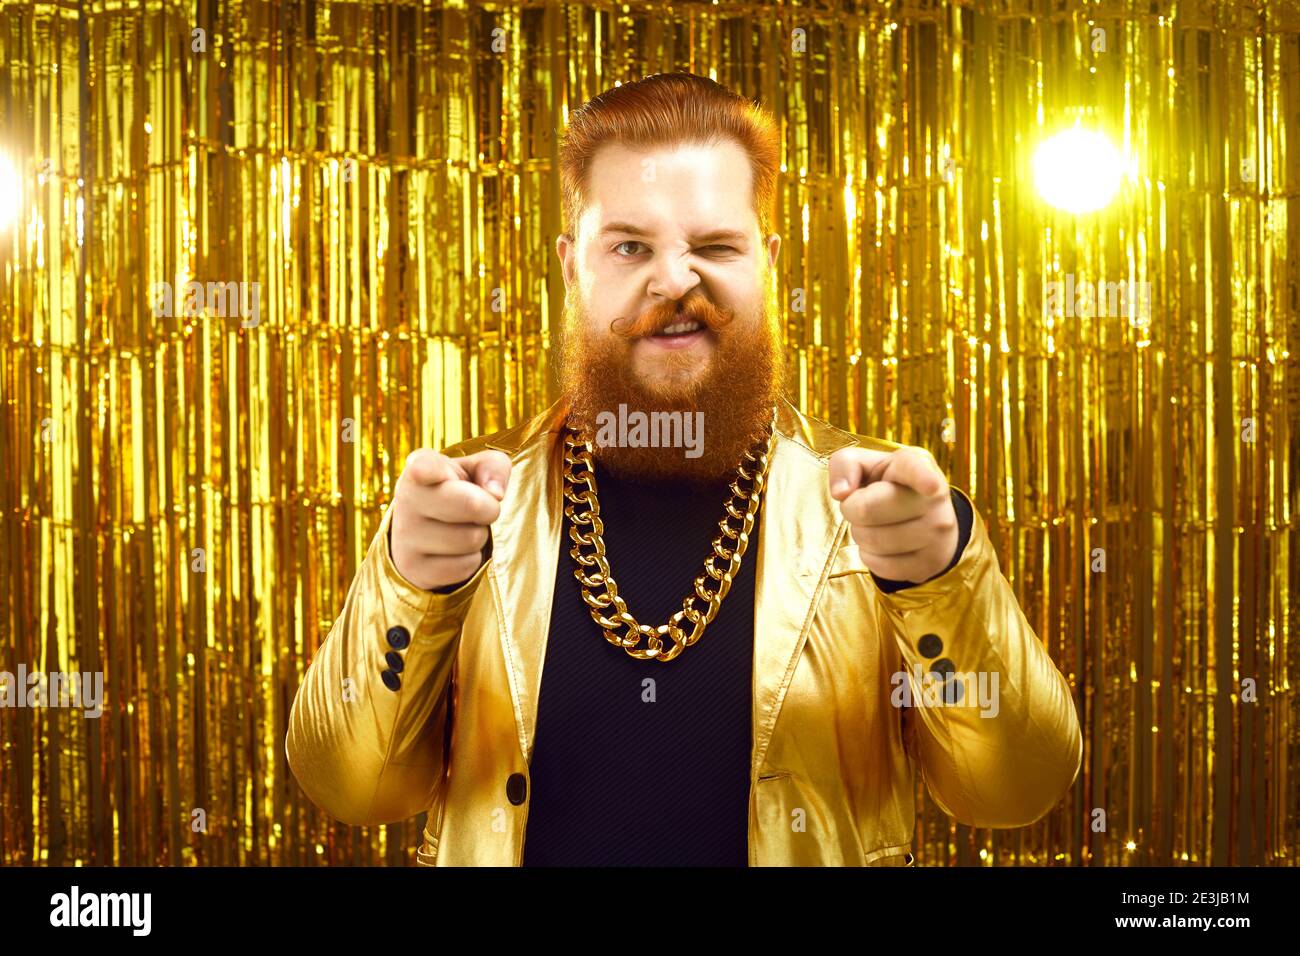 Extravagant man in funky golden jacket, with gold chain around neck, pointing at camera Stock Photo